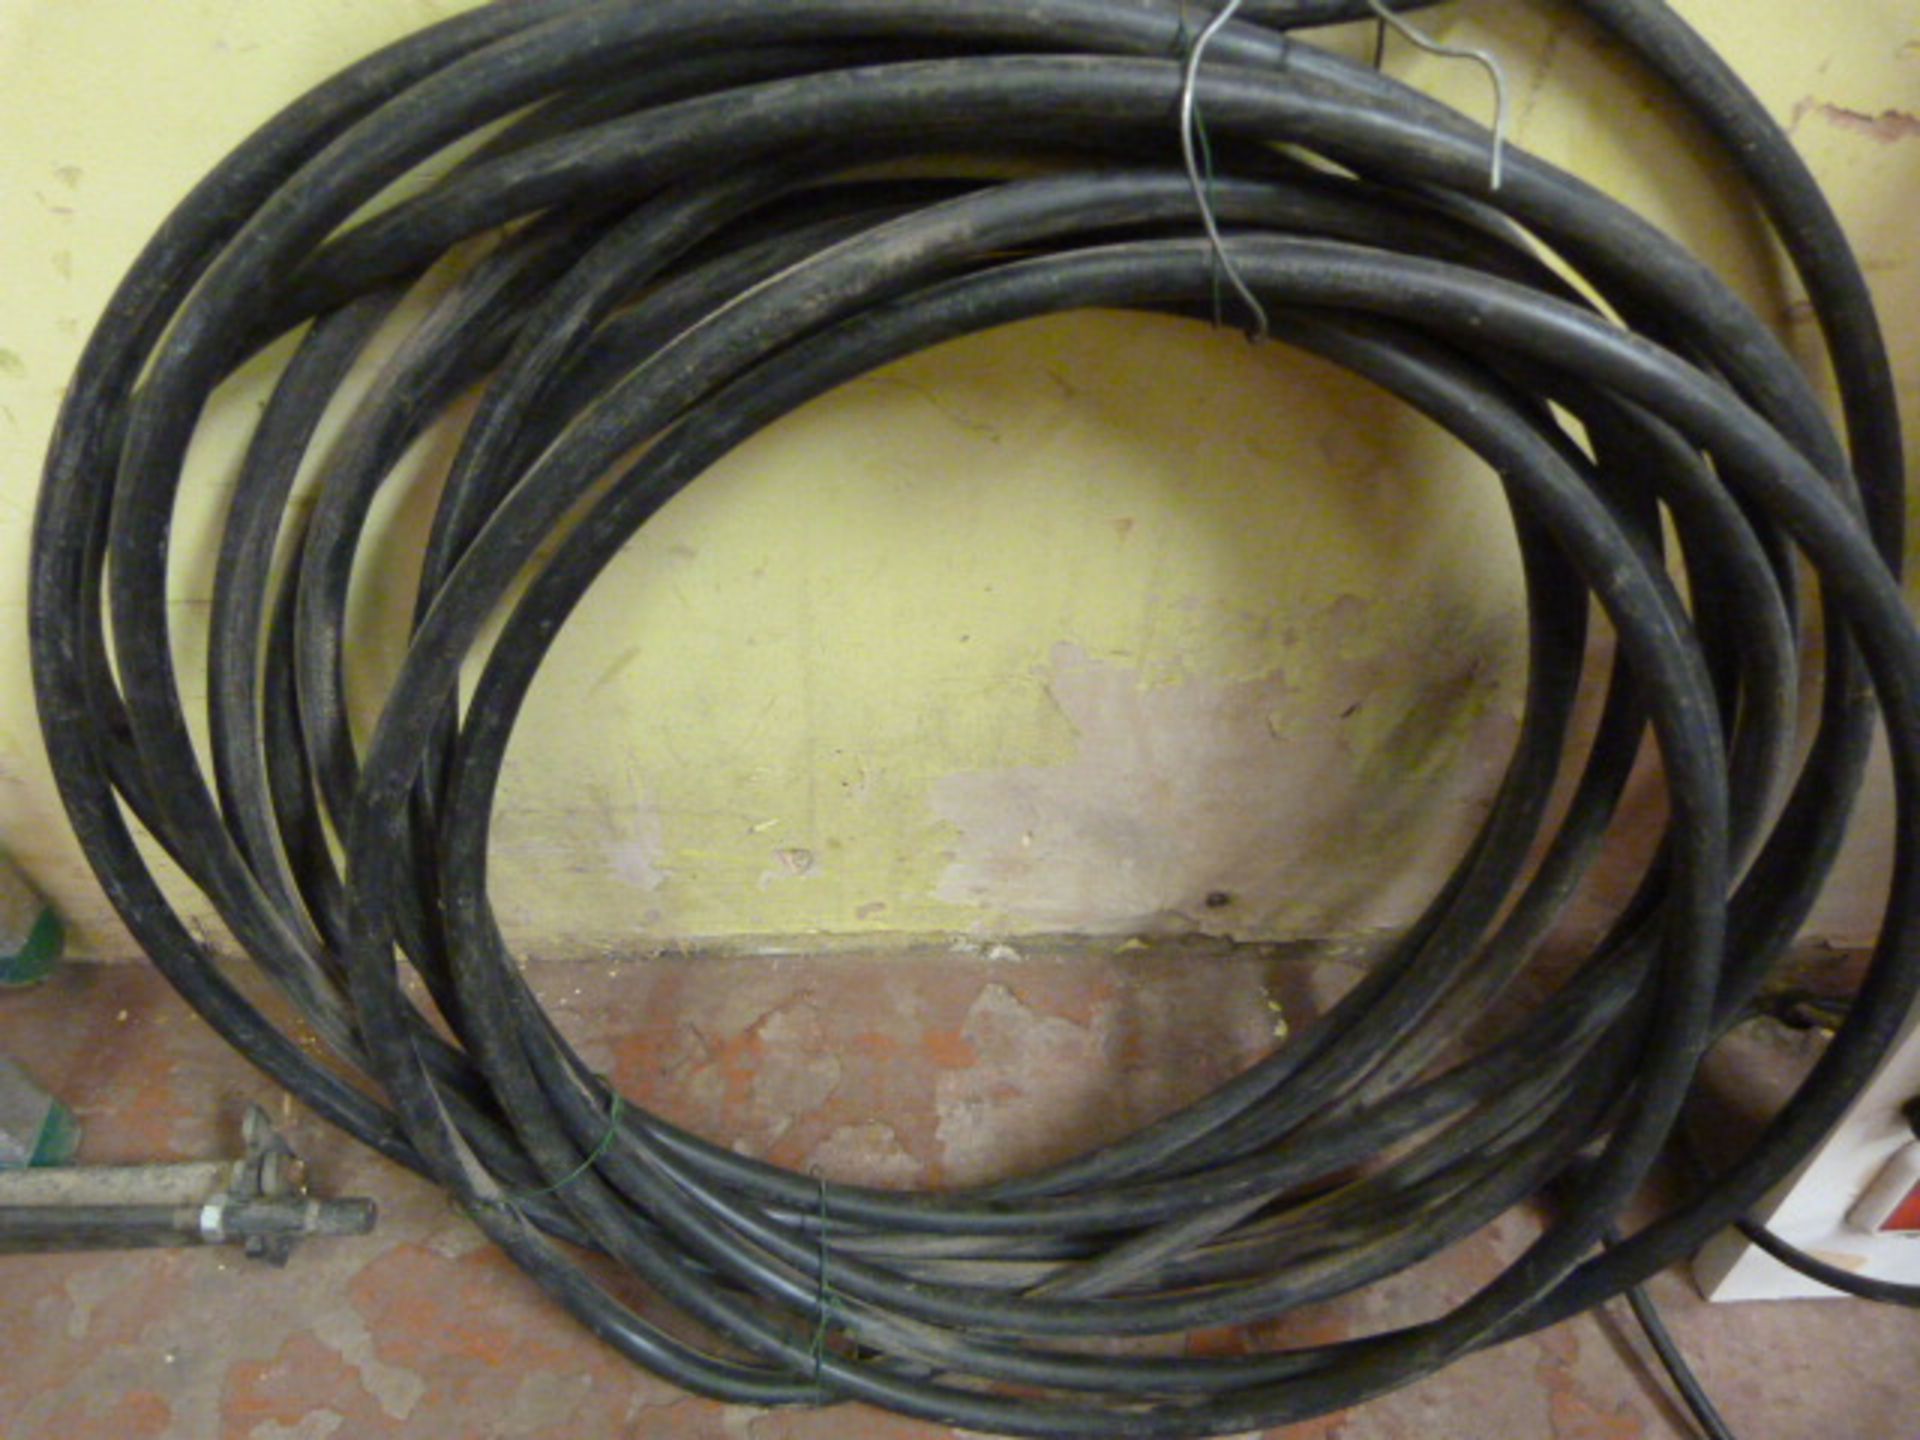 Roll of 3 Core Armoured Cable (Approx 14m Long, 60